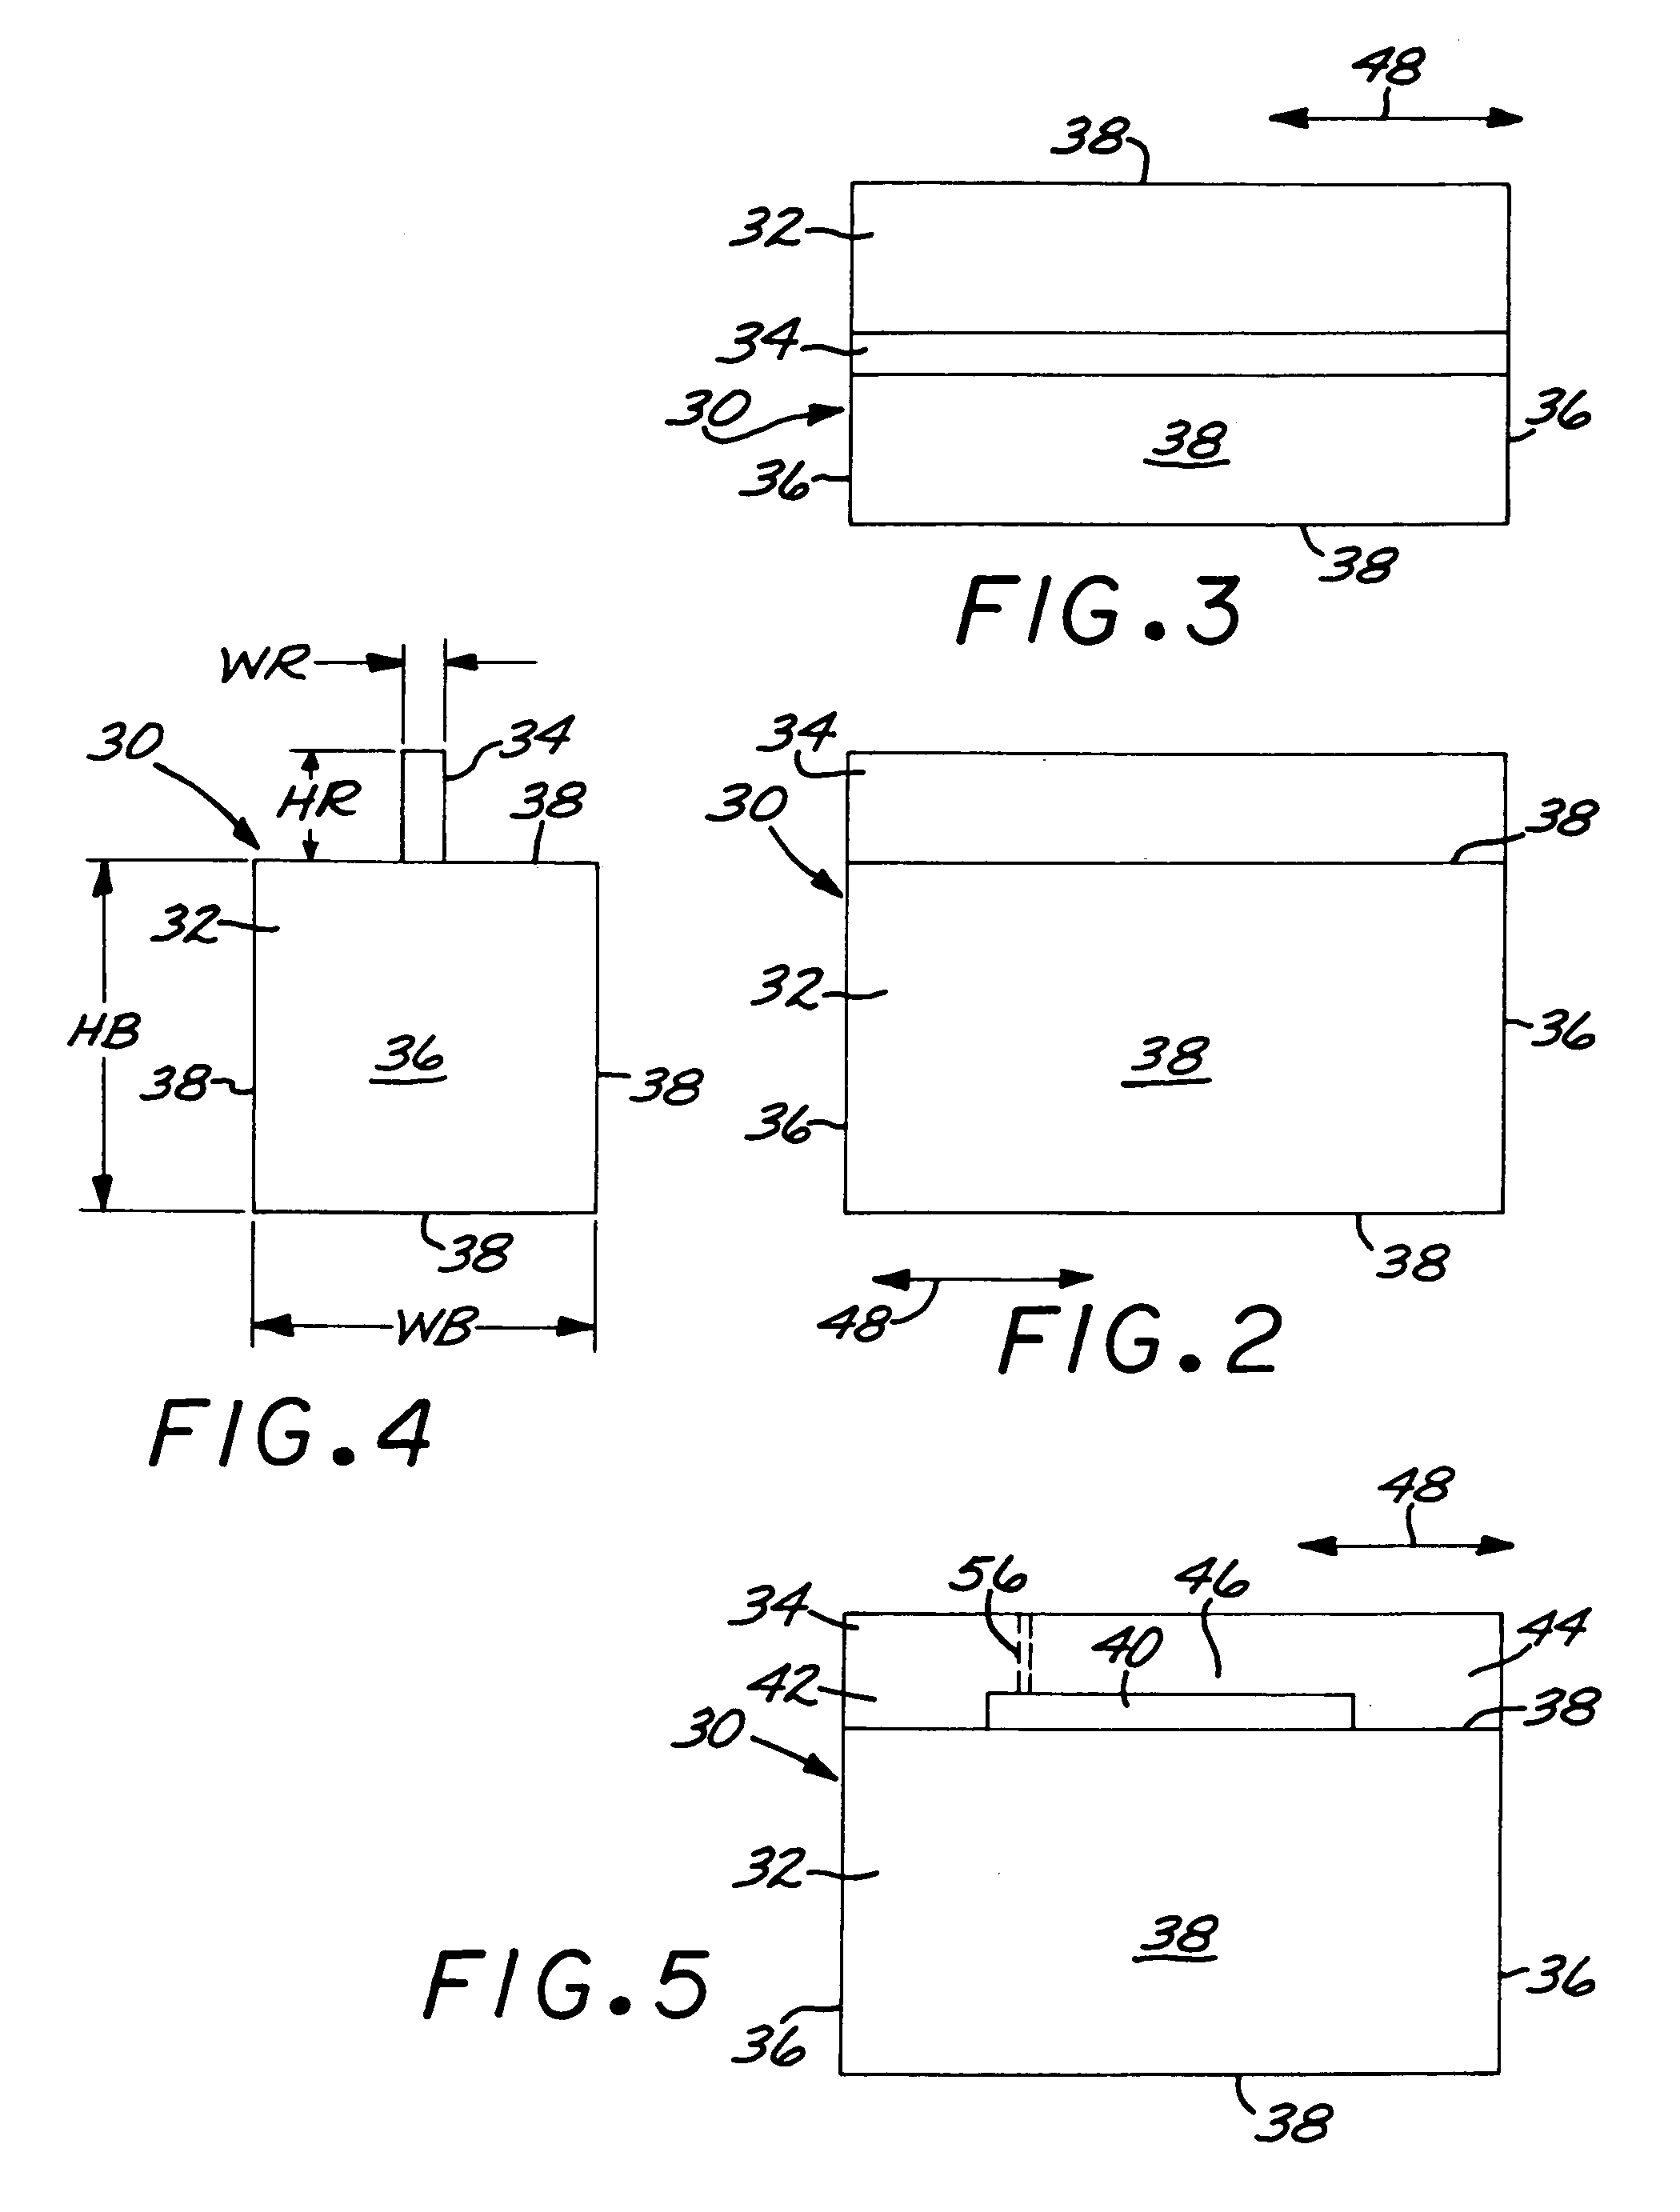 Test method for assessing thermal mechanical fatigue performance of a test material